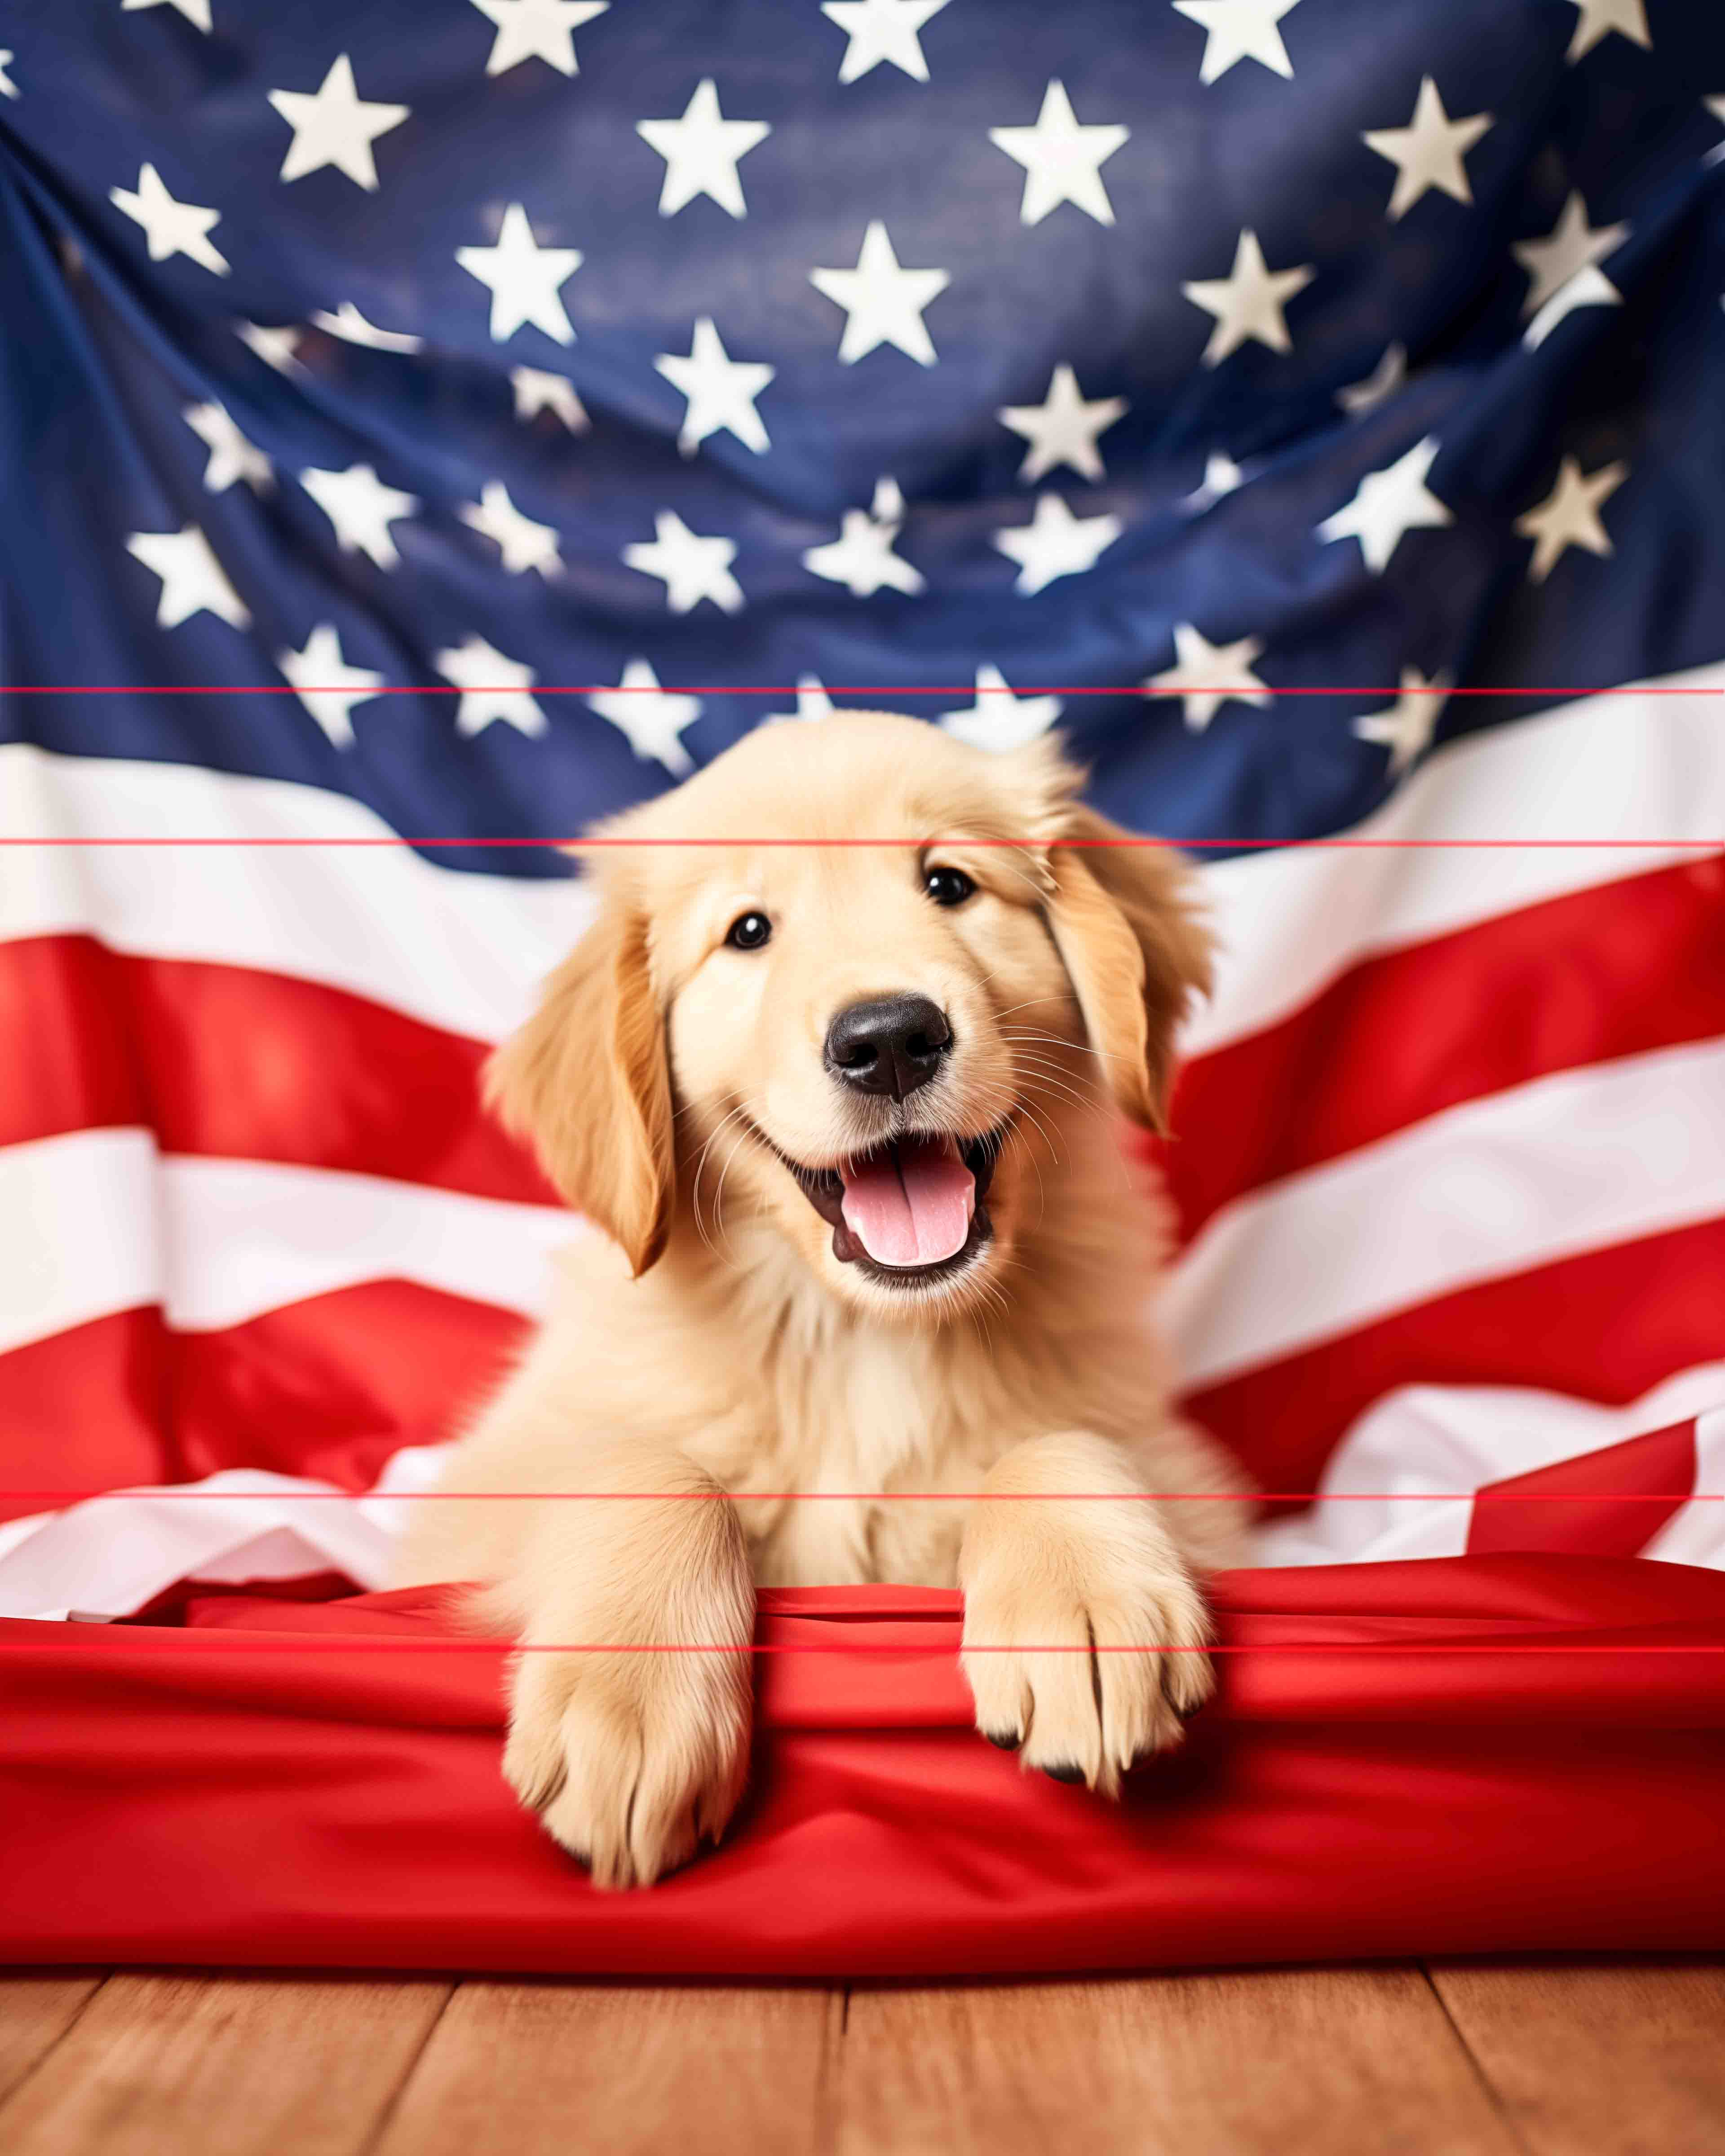 A golden retriever puppy sits in front of a draped american flag, looking directly at the viewer with a soft, curious expression. the puppy's fur is shiny and its ears are slightly floppy.